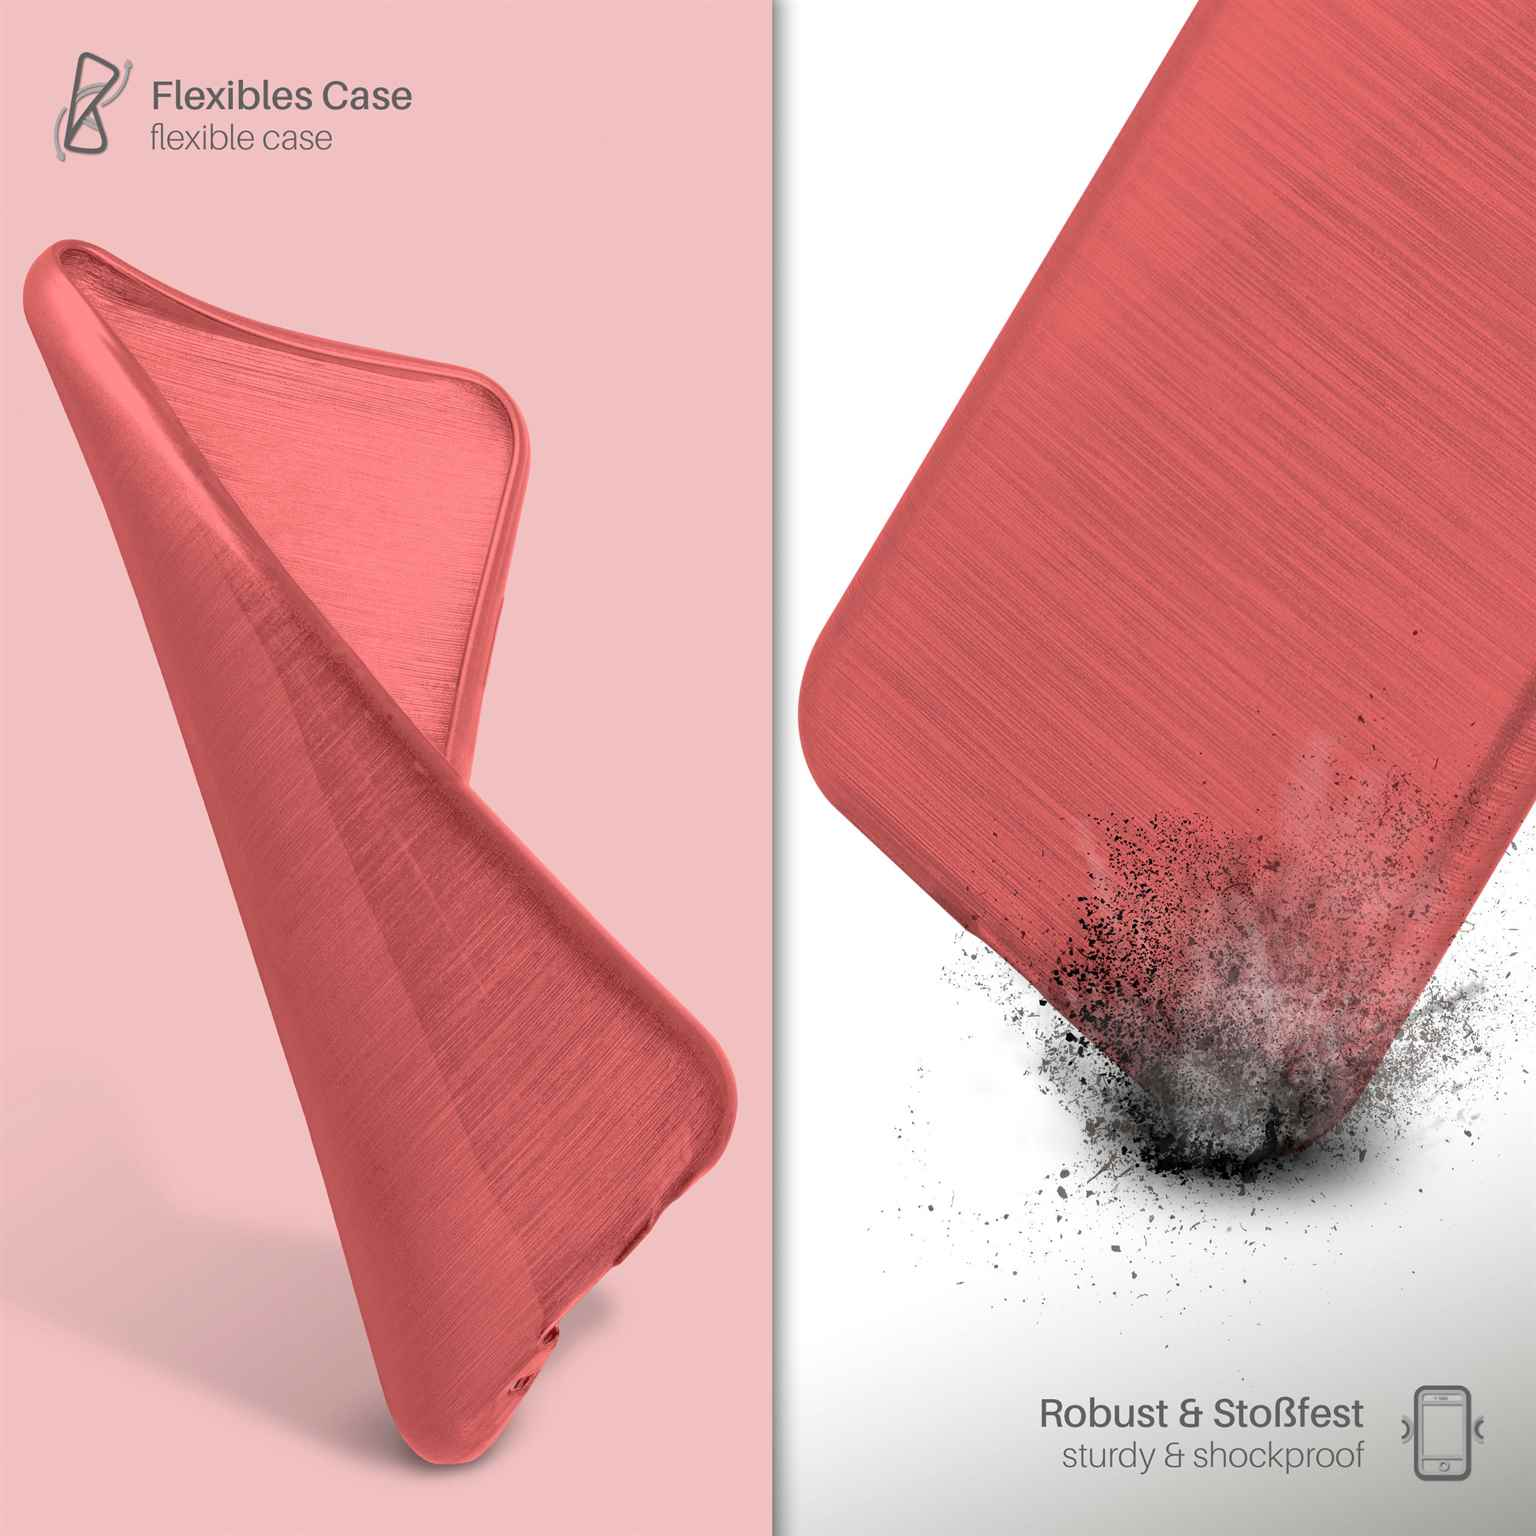 Coral-Red Apple, Brushed Case, iPhone MOEX Backcover, 6s,